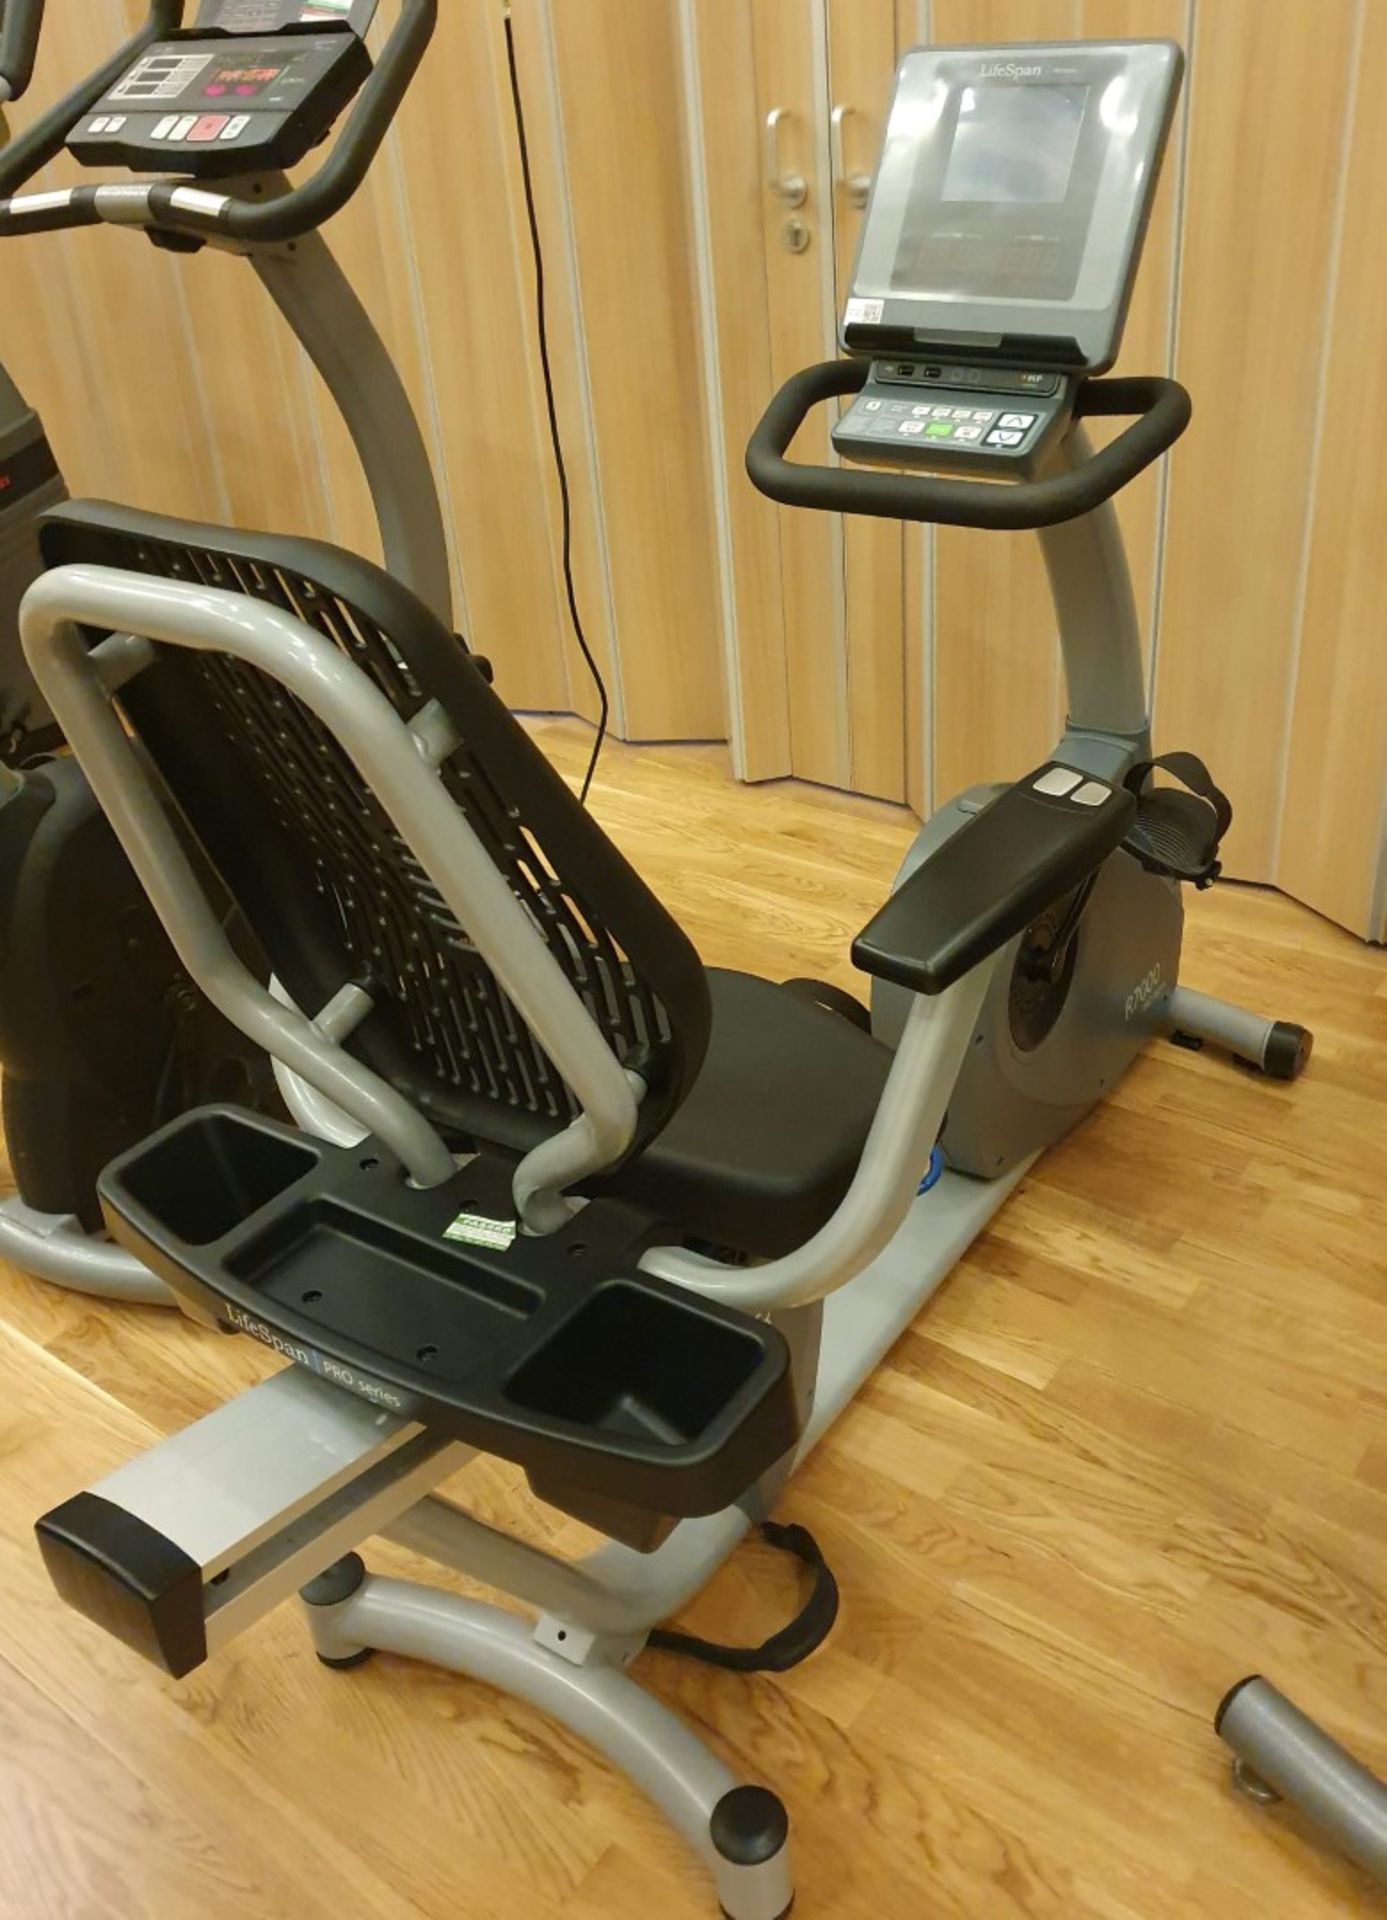 1 x Lifespan R7000 Pro Series Excercise Bike With USB Connectivity - Approx RRP £1,500 - CL552 - - Image 3 of 6